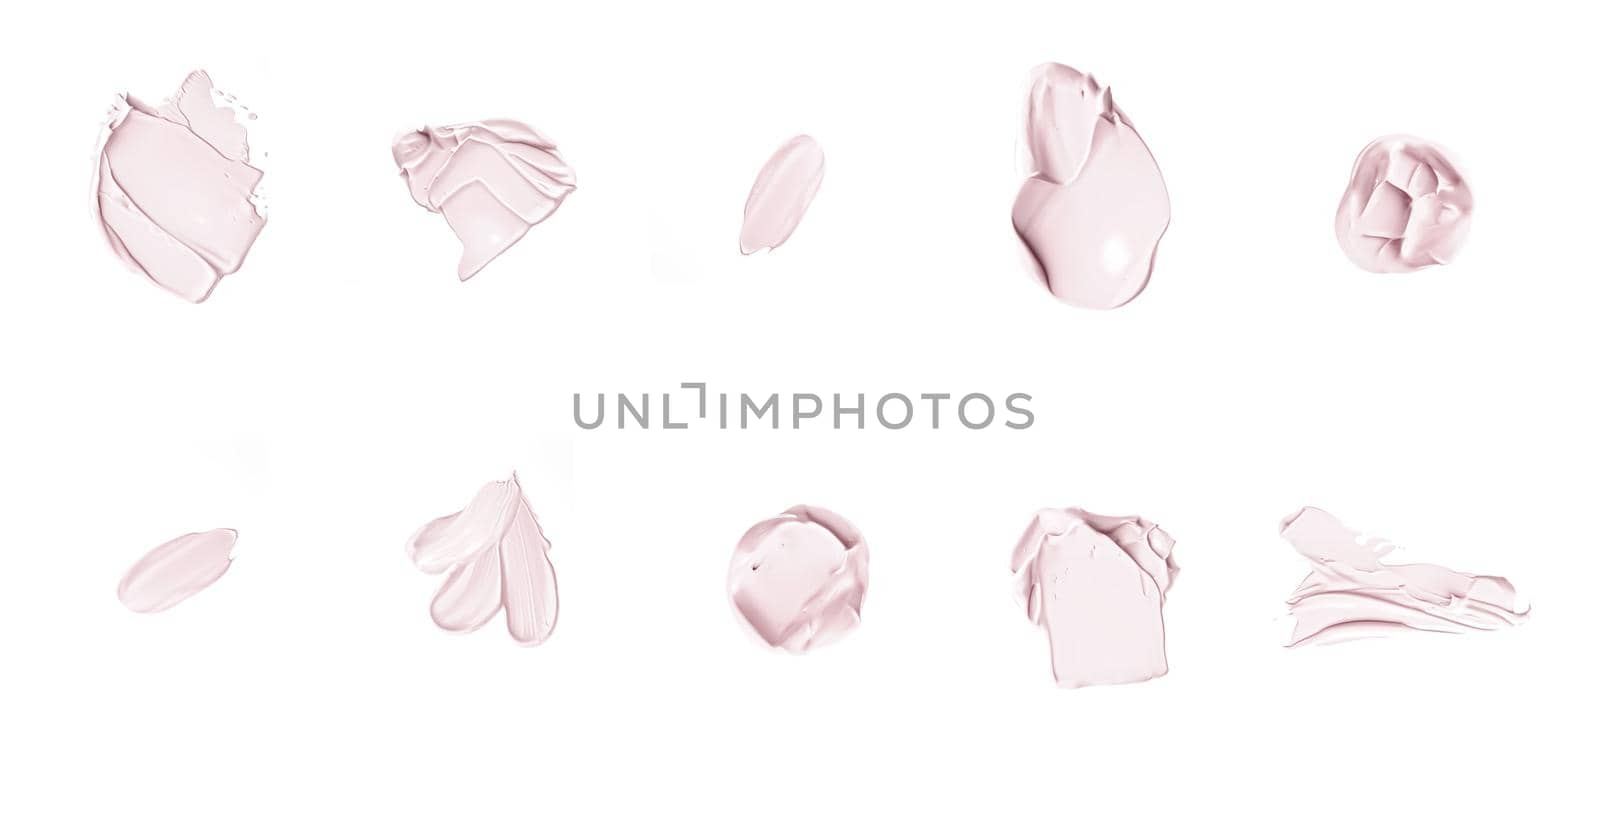 Pastel beige beauty swatches, skincare and makeup cosmetic product sample texture isolated on white background, make-up smudge, cream cosmetics smear or paint brush stroke closeup